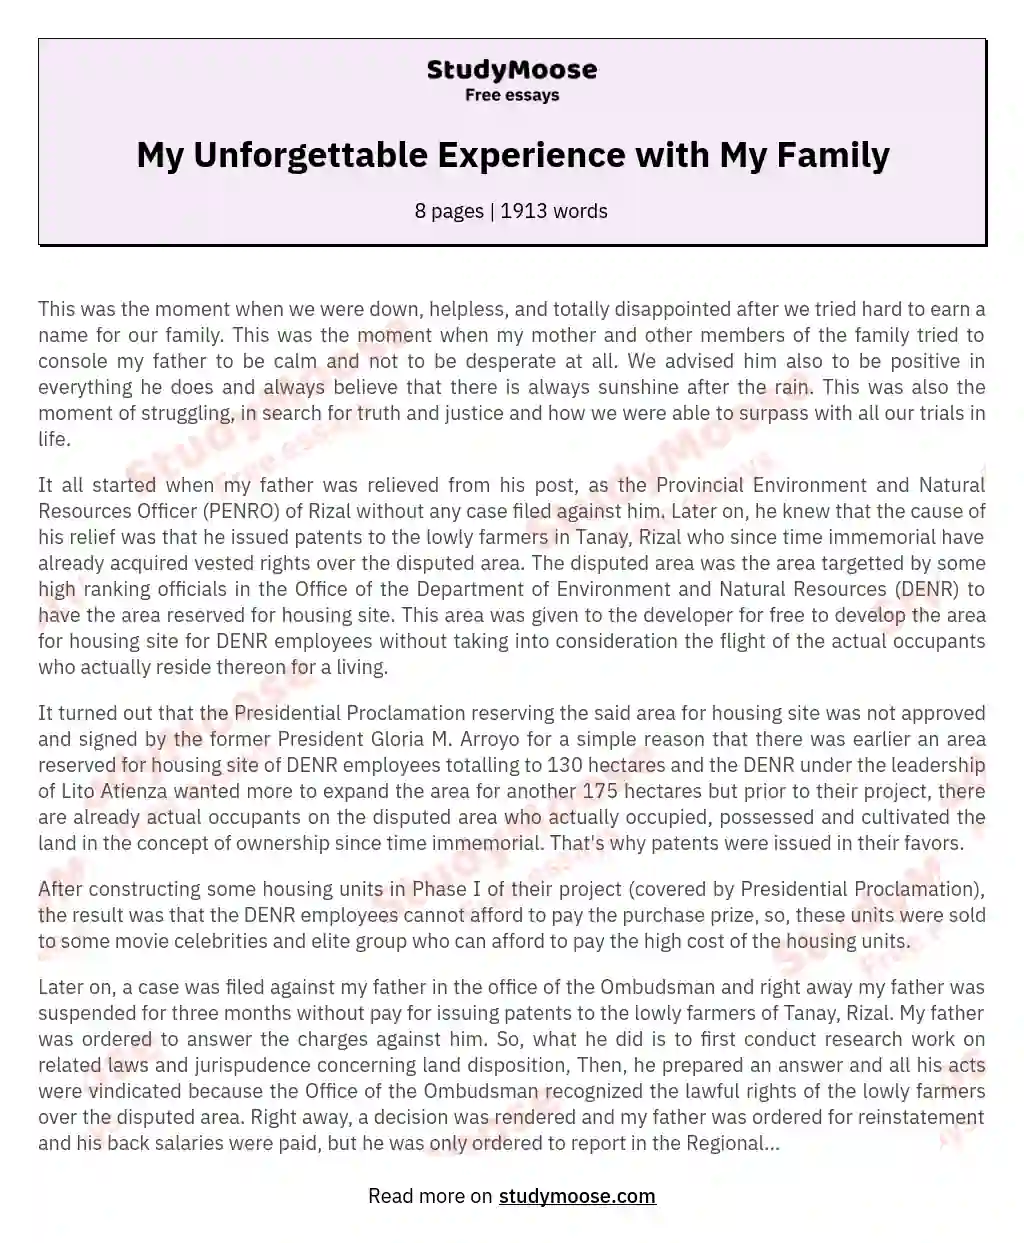 My Unforgettable Experience with My Family essay